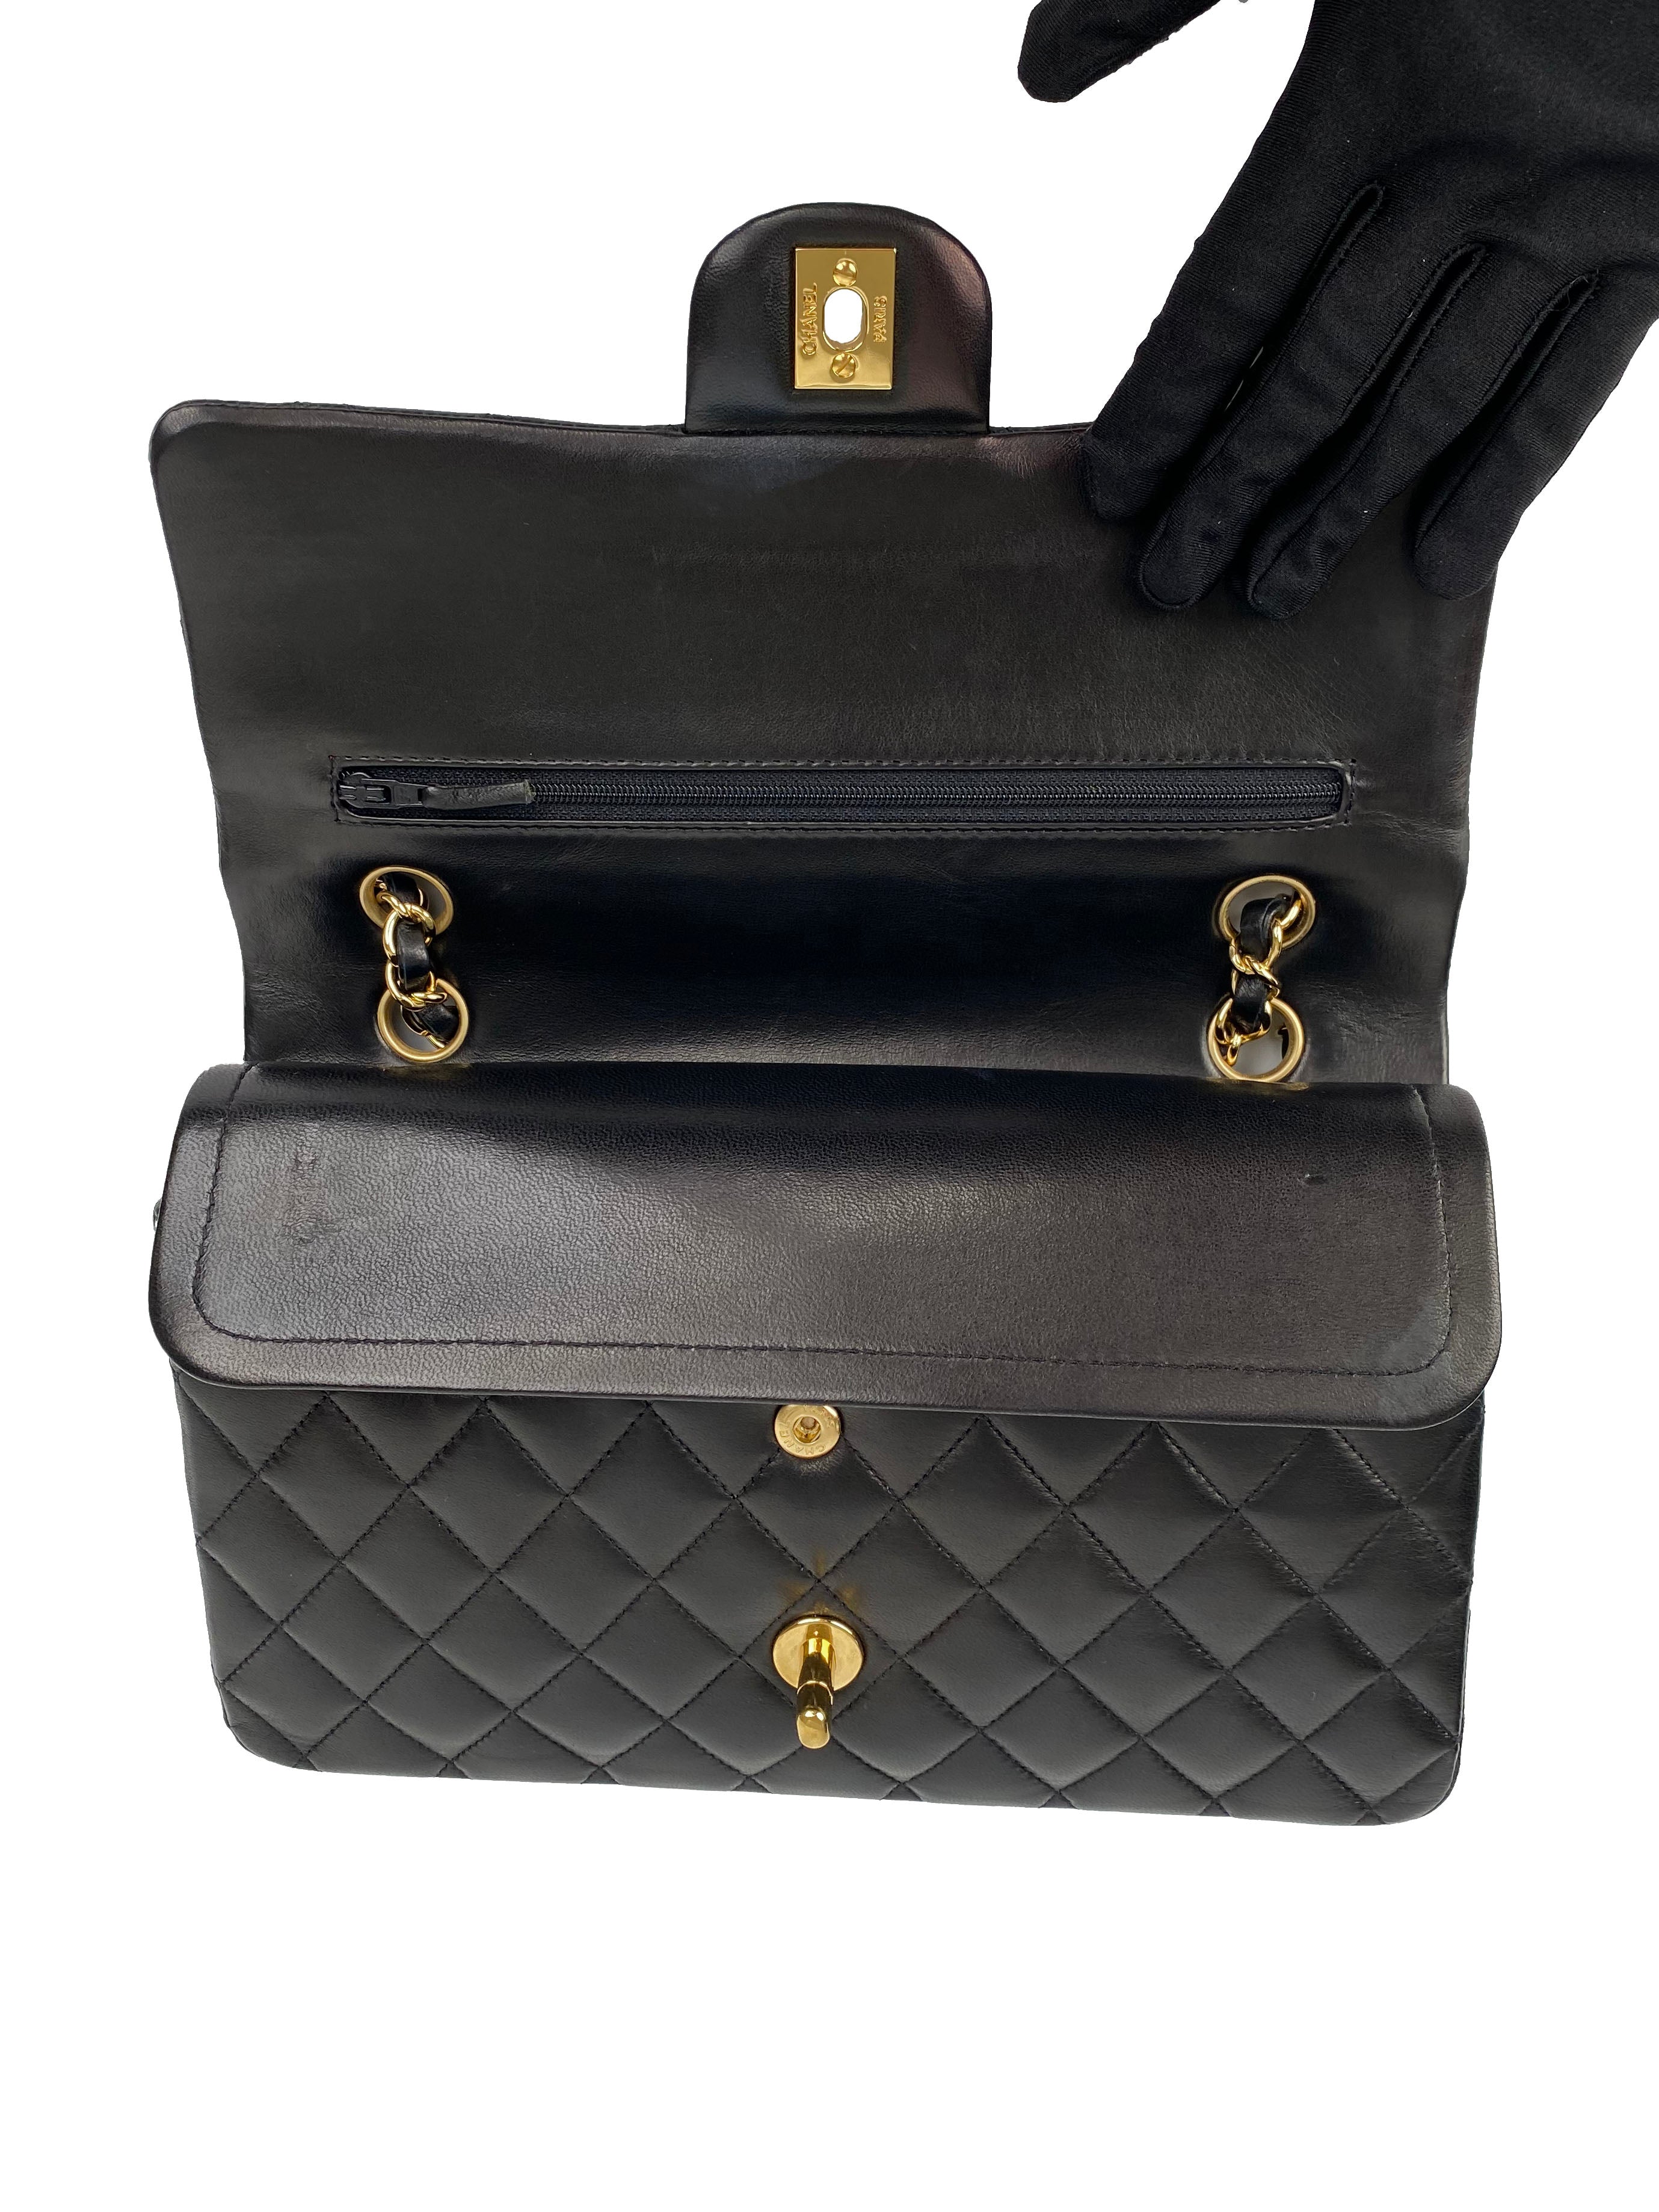 Chanel Black Medium Quilted Classic Flap Bag